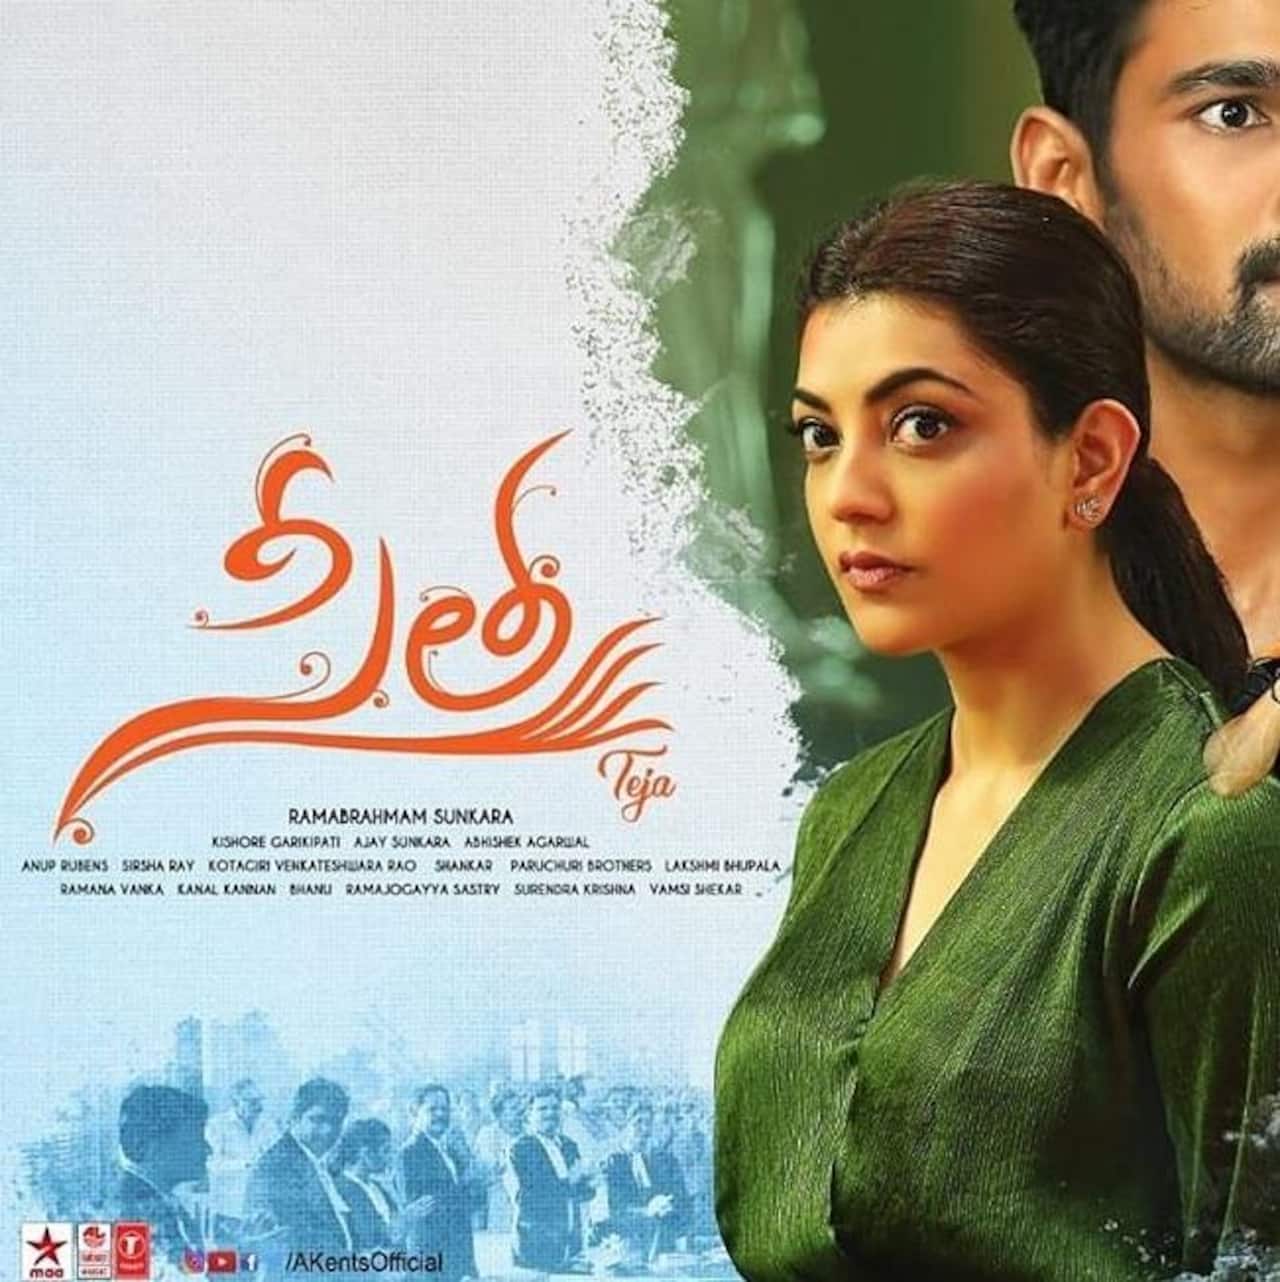 Sita Movie Review: Kajal Aggarwal is the only saving grace in this incapacitated plot that fails to entertain